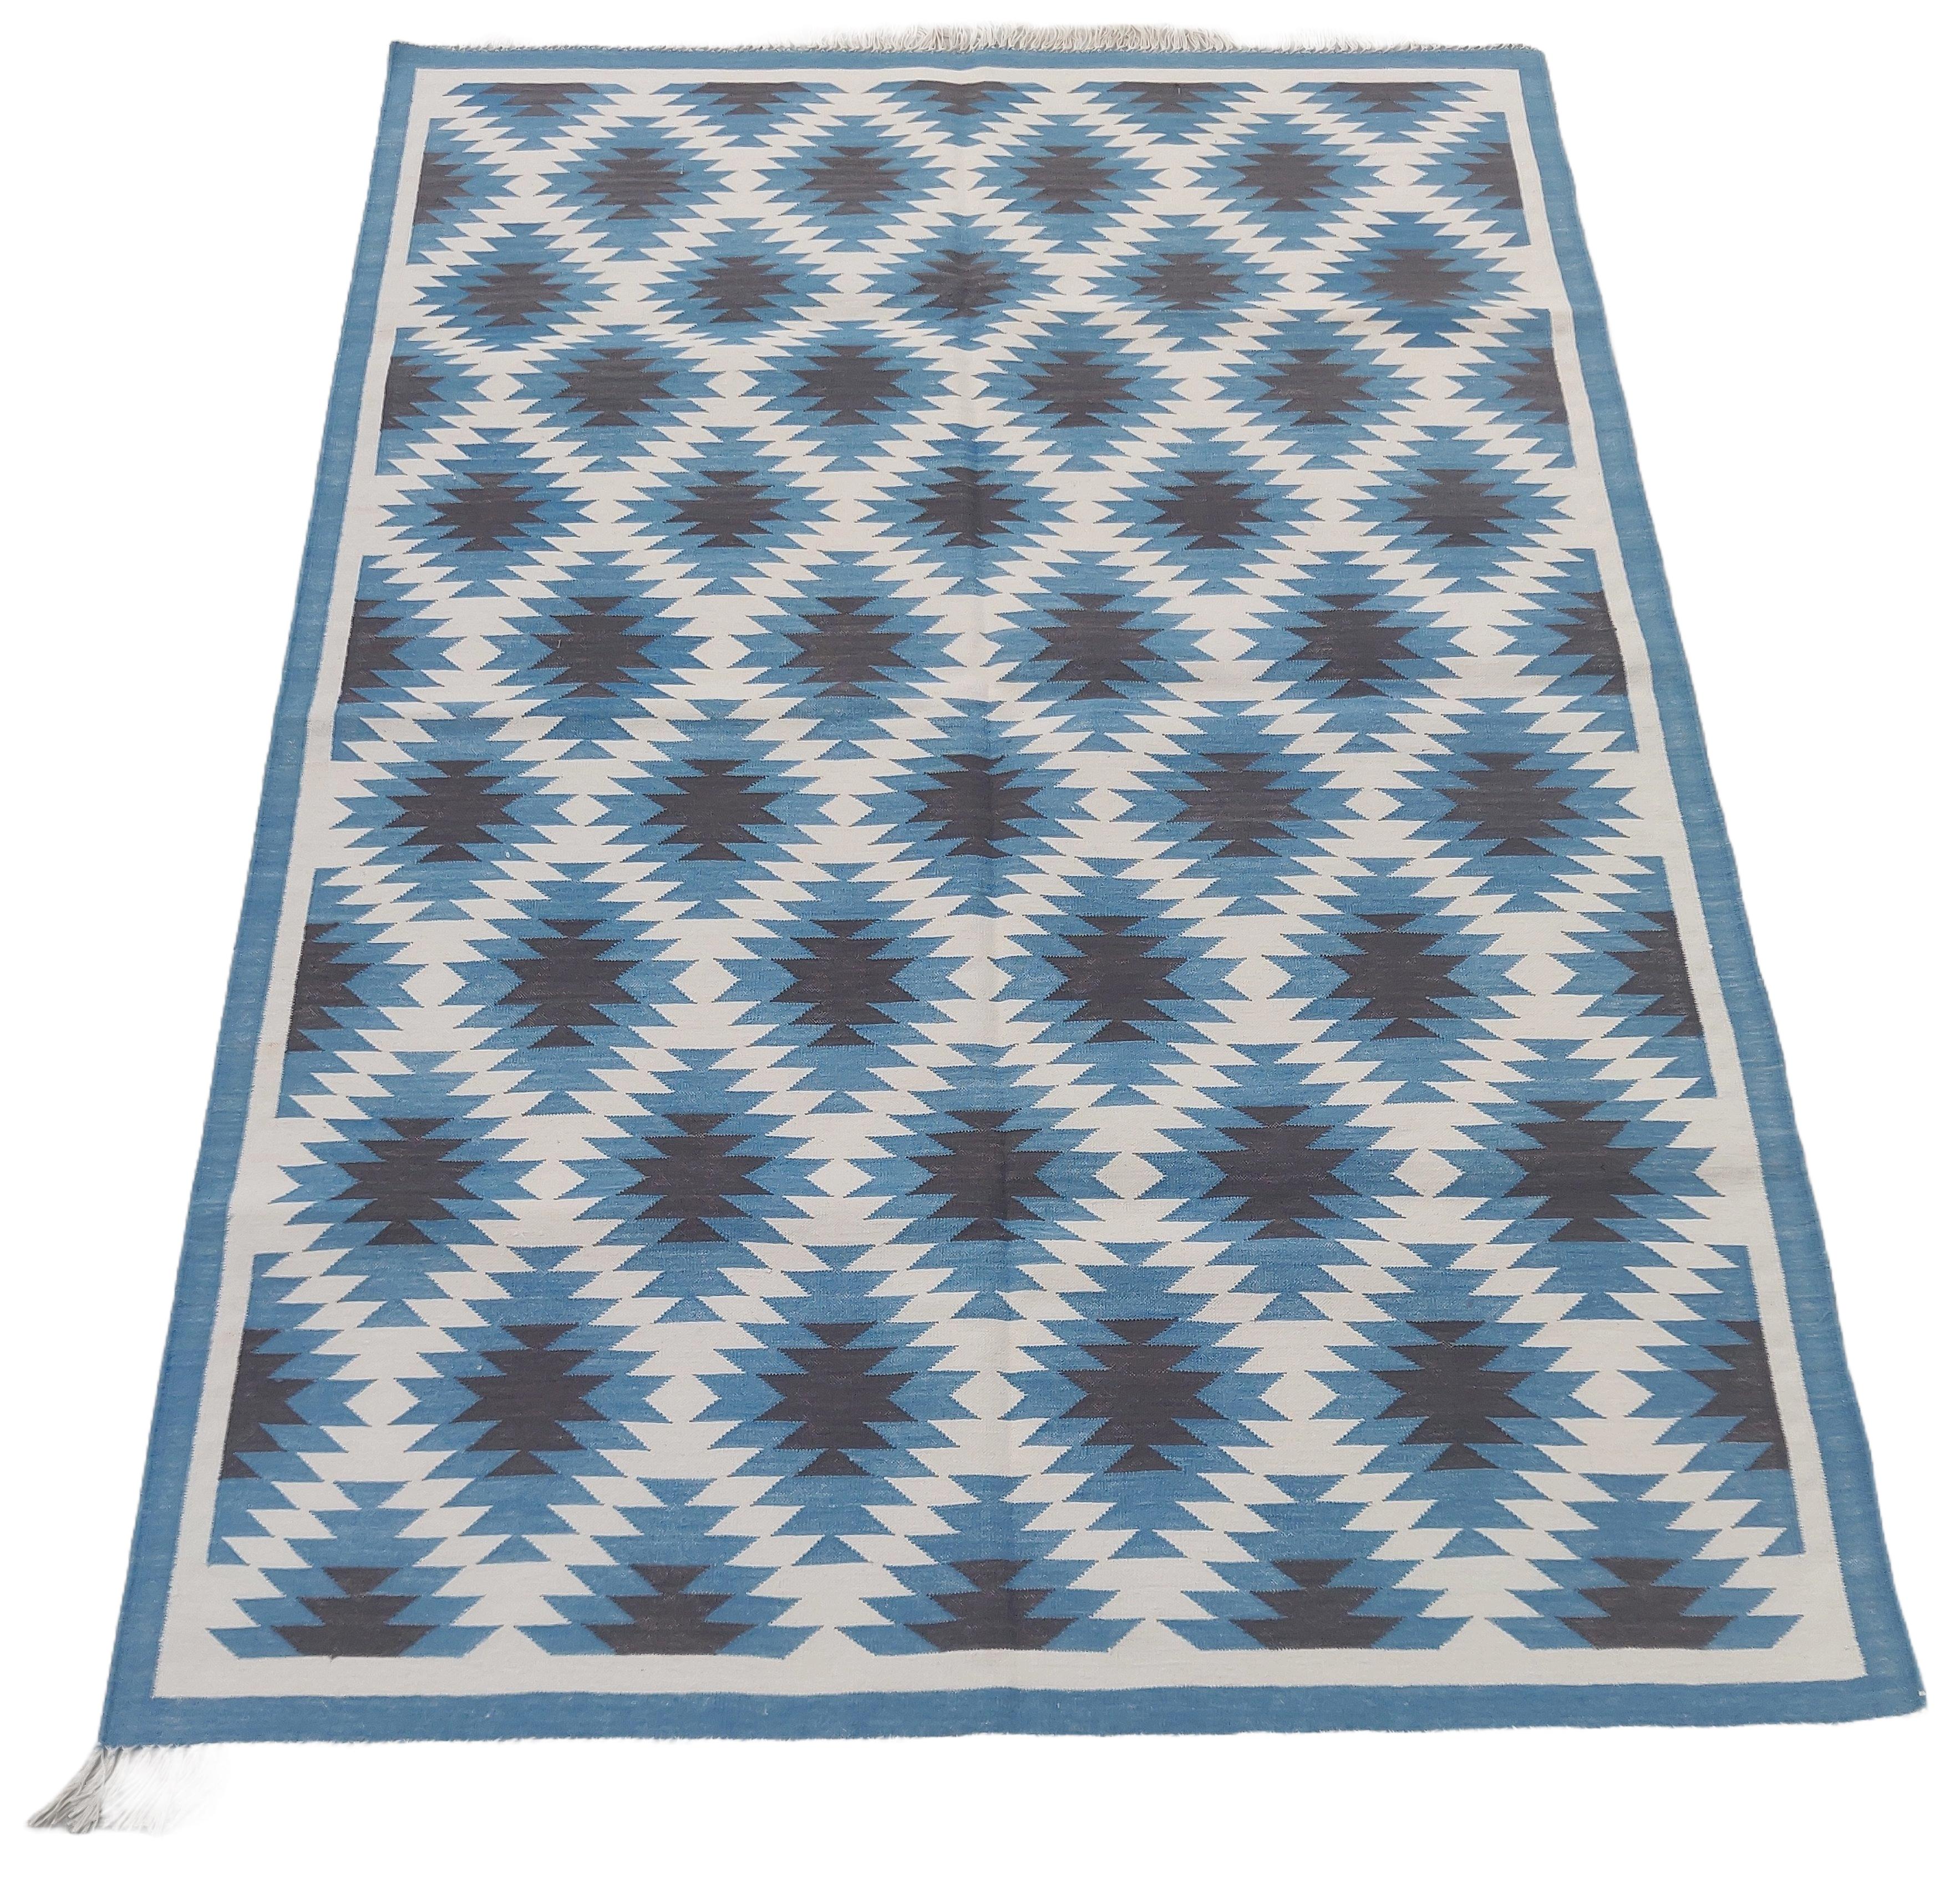 Cotton Vegetable Dyed Blue and White Geometric Indian Dhurrie Rug-4'x6' 

These special flat-weave dhurries are hand-woven with 15 ply 100% cotton yarn. Due to the special manufacturing techniques used to create our rugs, the size and color of each